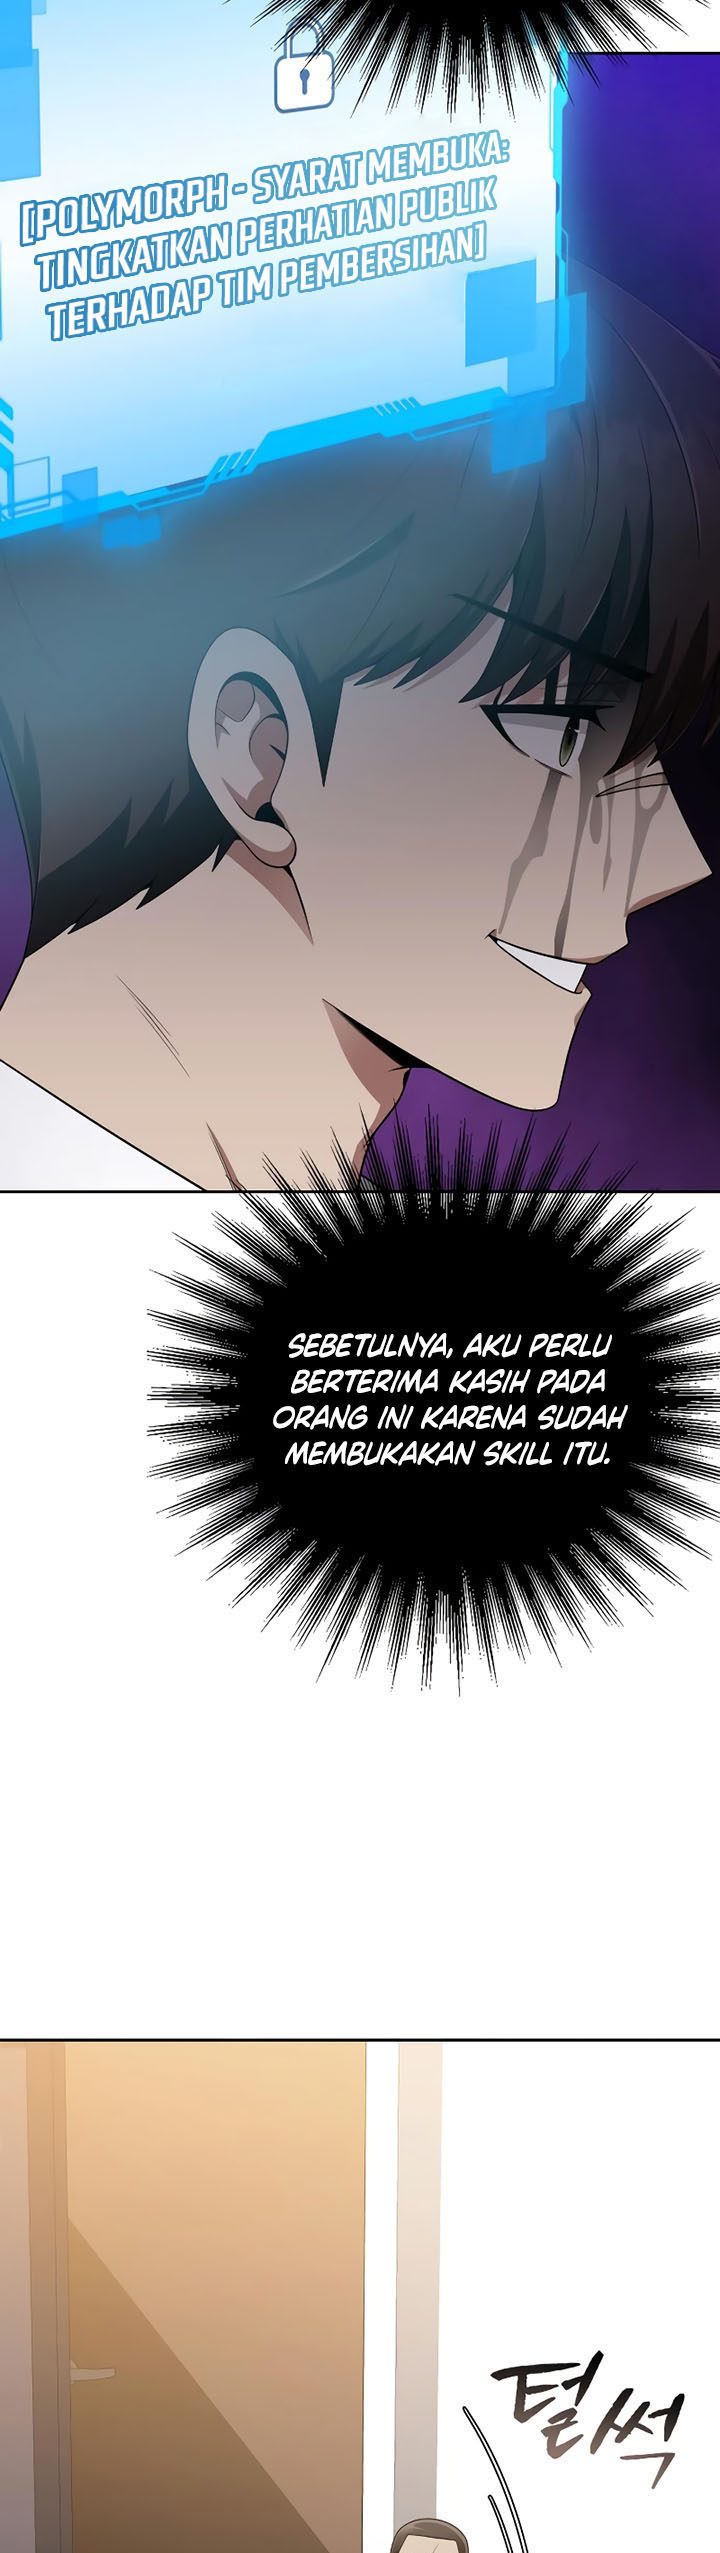 Dilarang COPAS - situs resmi www.mangacanblog.com - Komik clever cleaning life of the returned genius hunter 021 - chapter 21 22 Indonesia clever cleaning life of the returned genius hunter 021 - chapter 21 Terbaru 26|Baca Manga Komik Indonesia|Mangacan